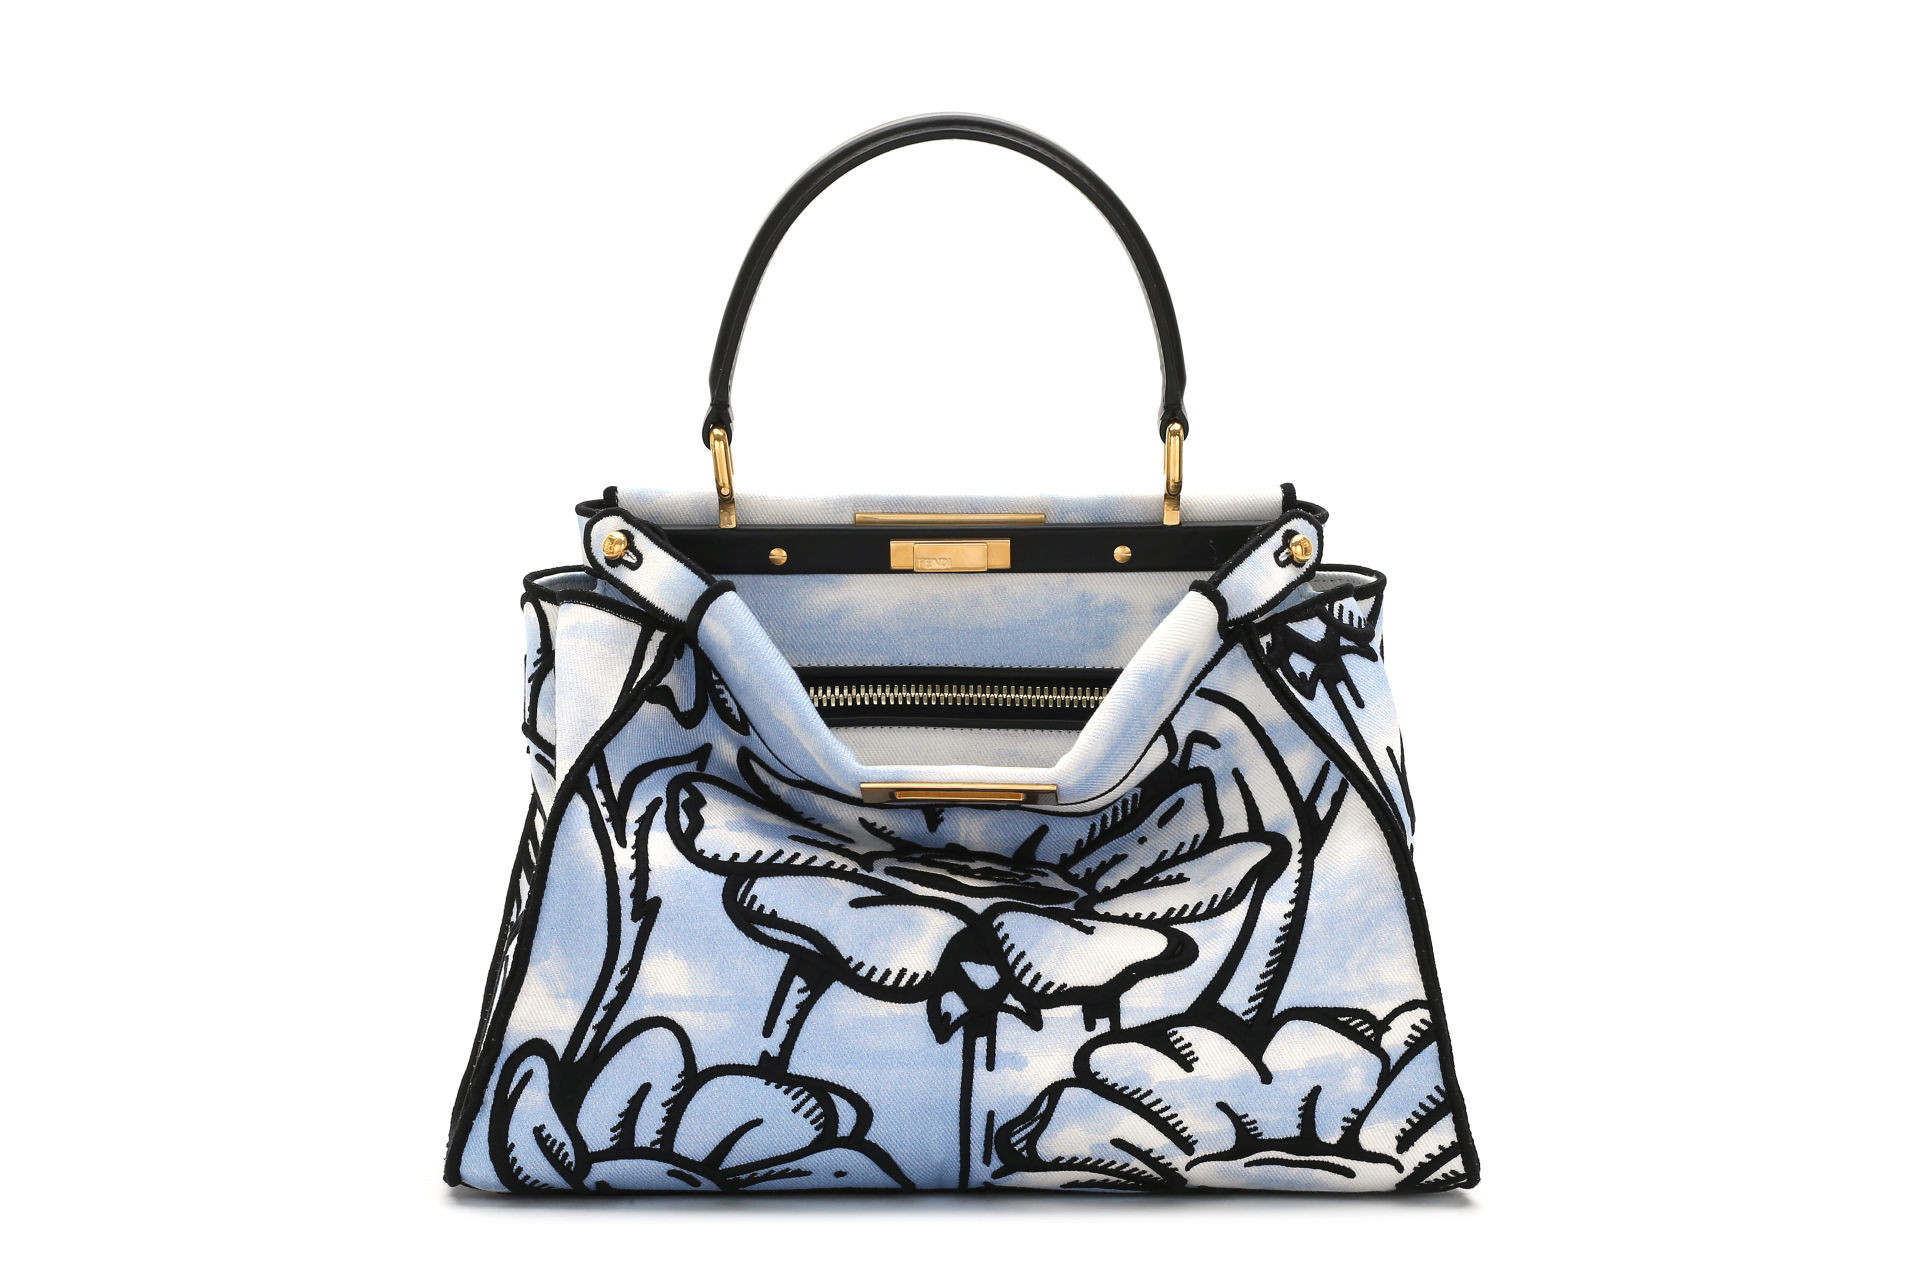 The new 'California Sky' collection by Fendi and Joshua Vides